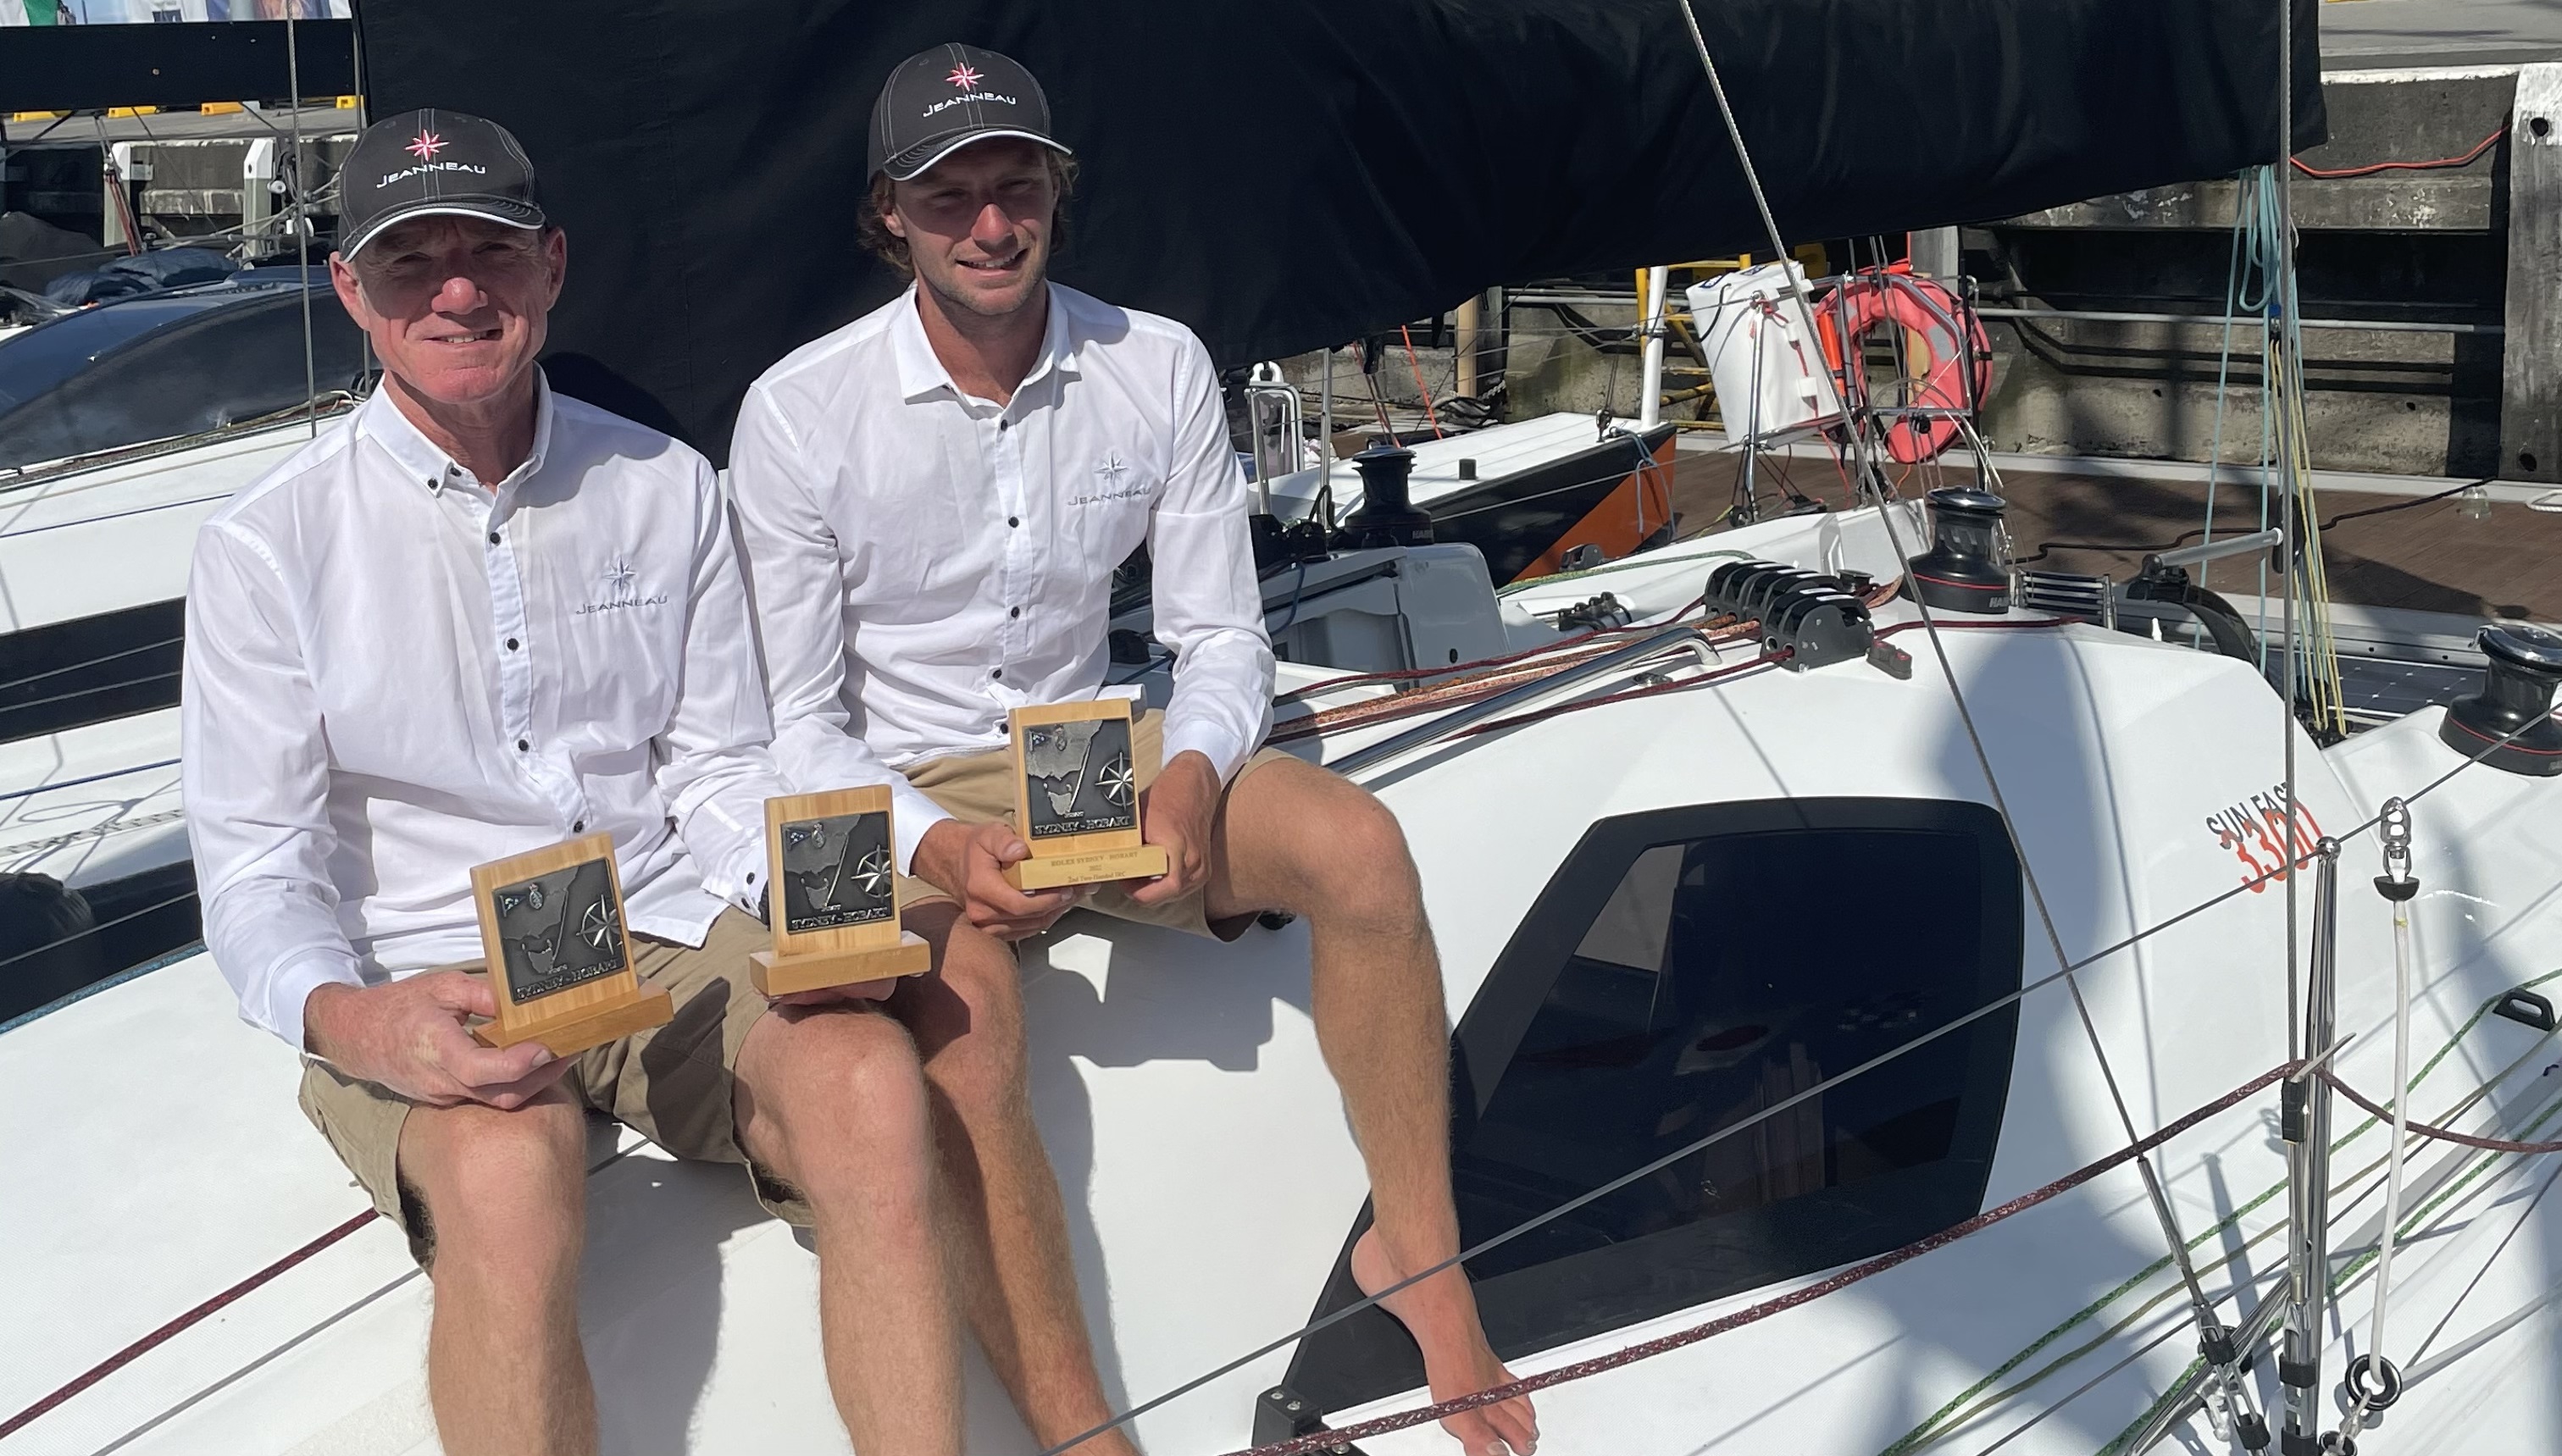 Lee Condell and a crew member in white shirts sitting on their boat holding his trophy